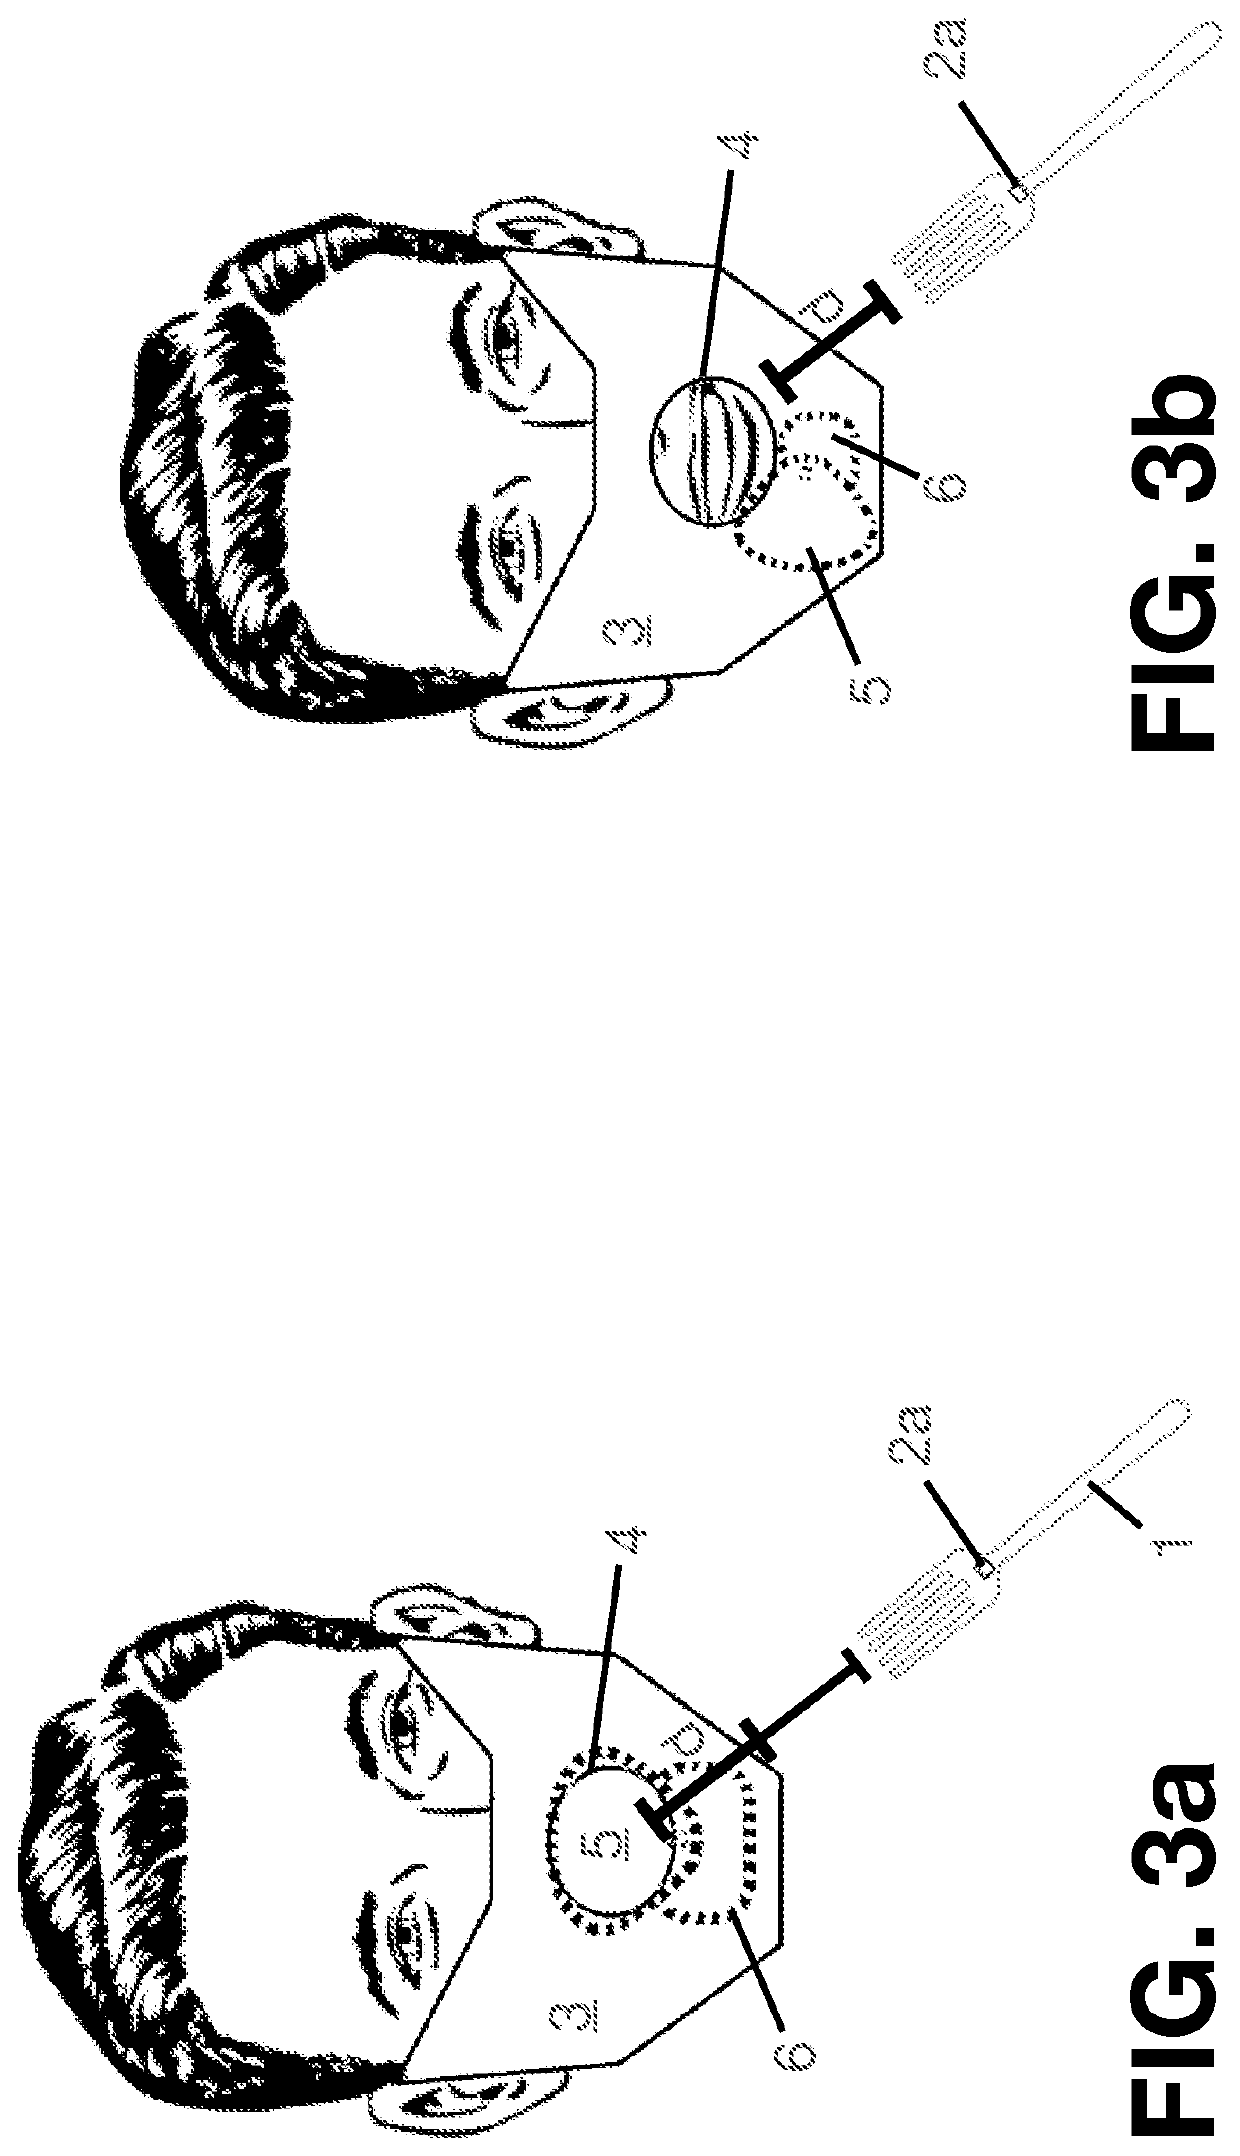 Apparatus for safe eating and drinking in public during airborne contamination